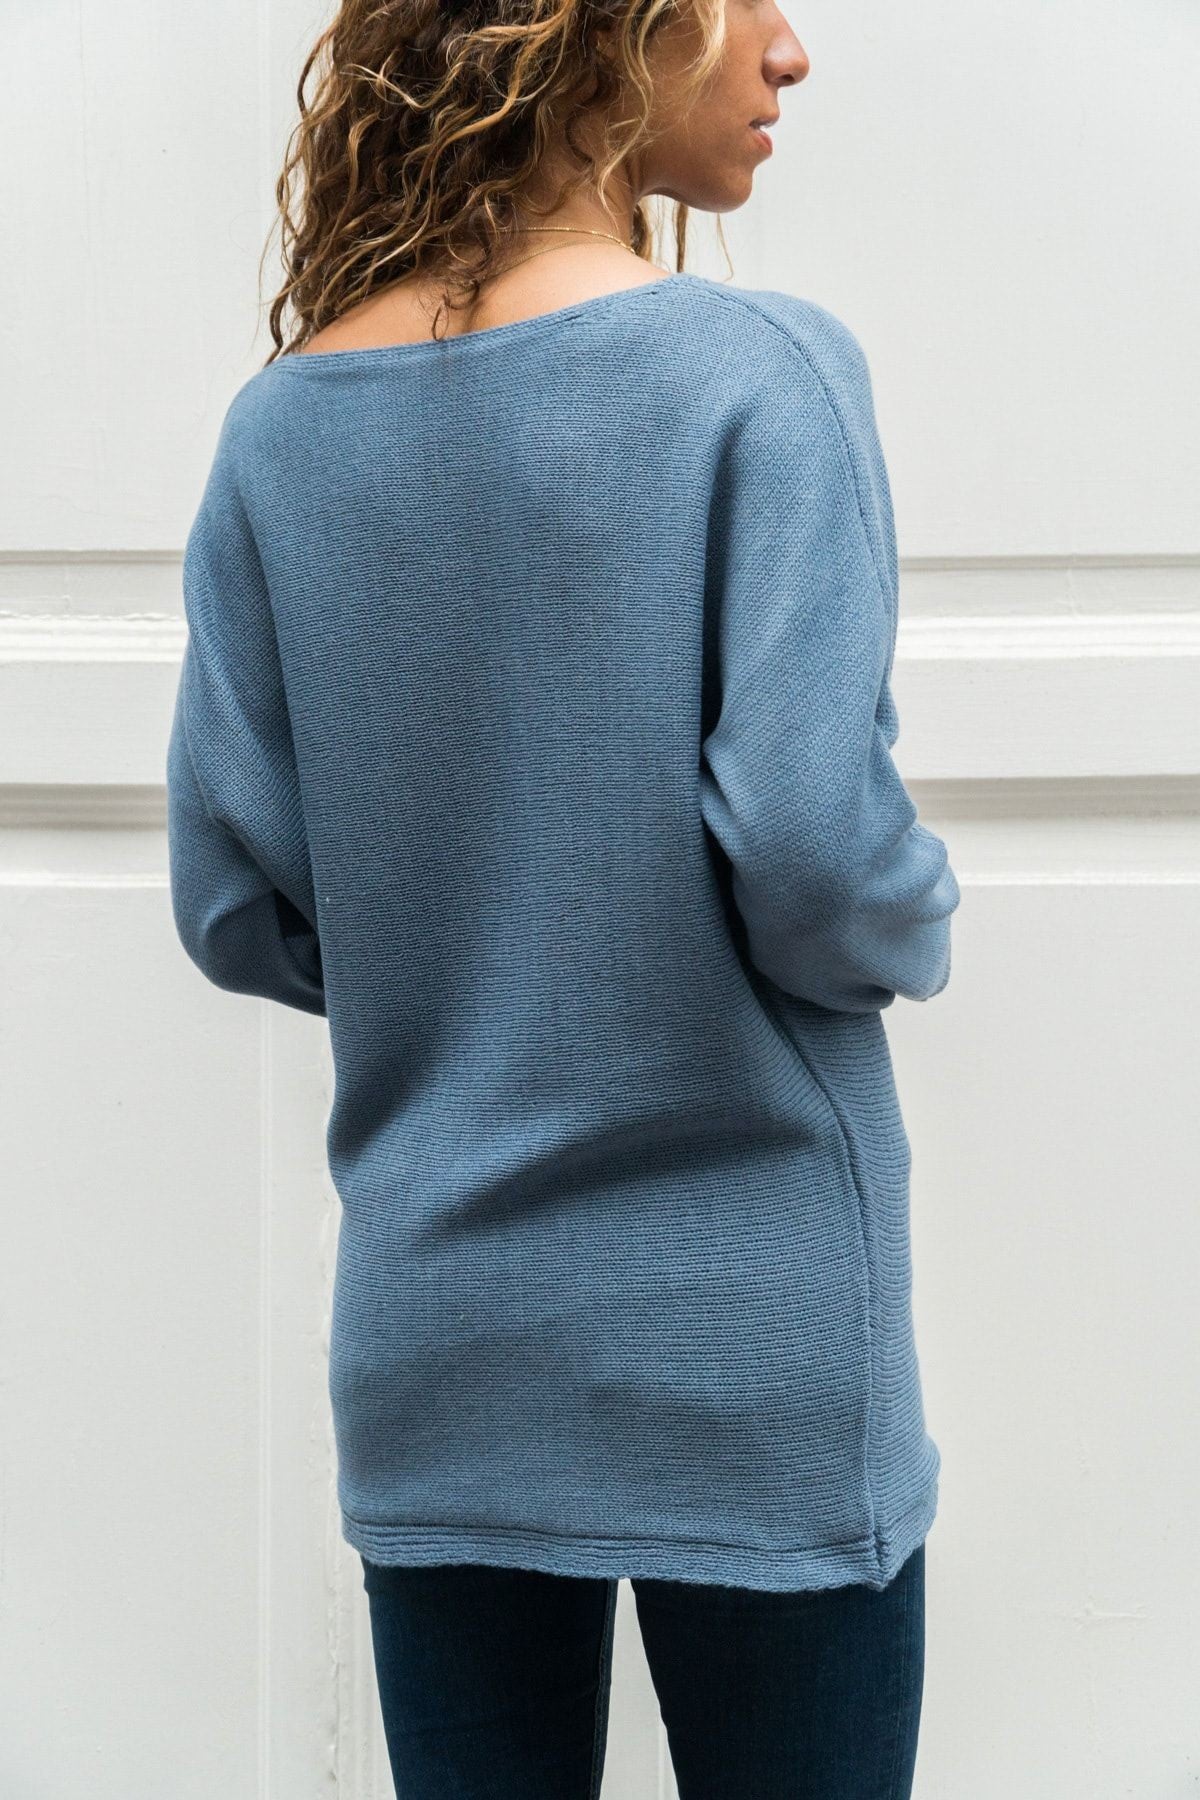 Blue Women's Geometric Pattern Knit Sweater - Wide Round Neck, Long Sleeves with Special Design in Matching Colors (Acrylic)